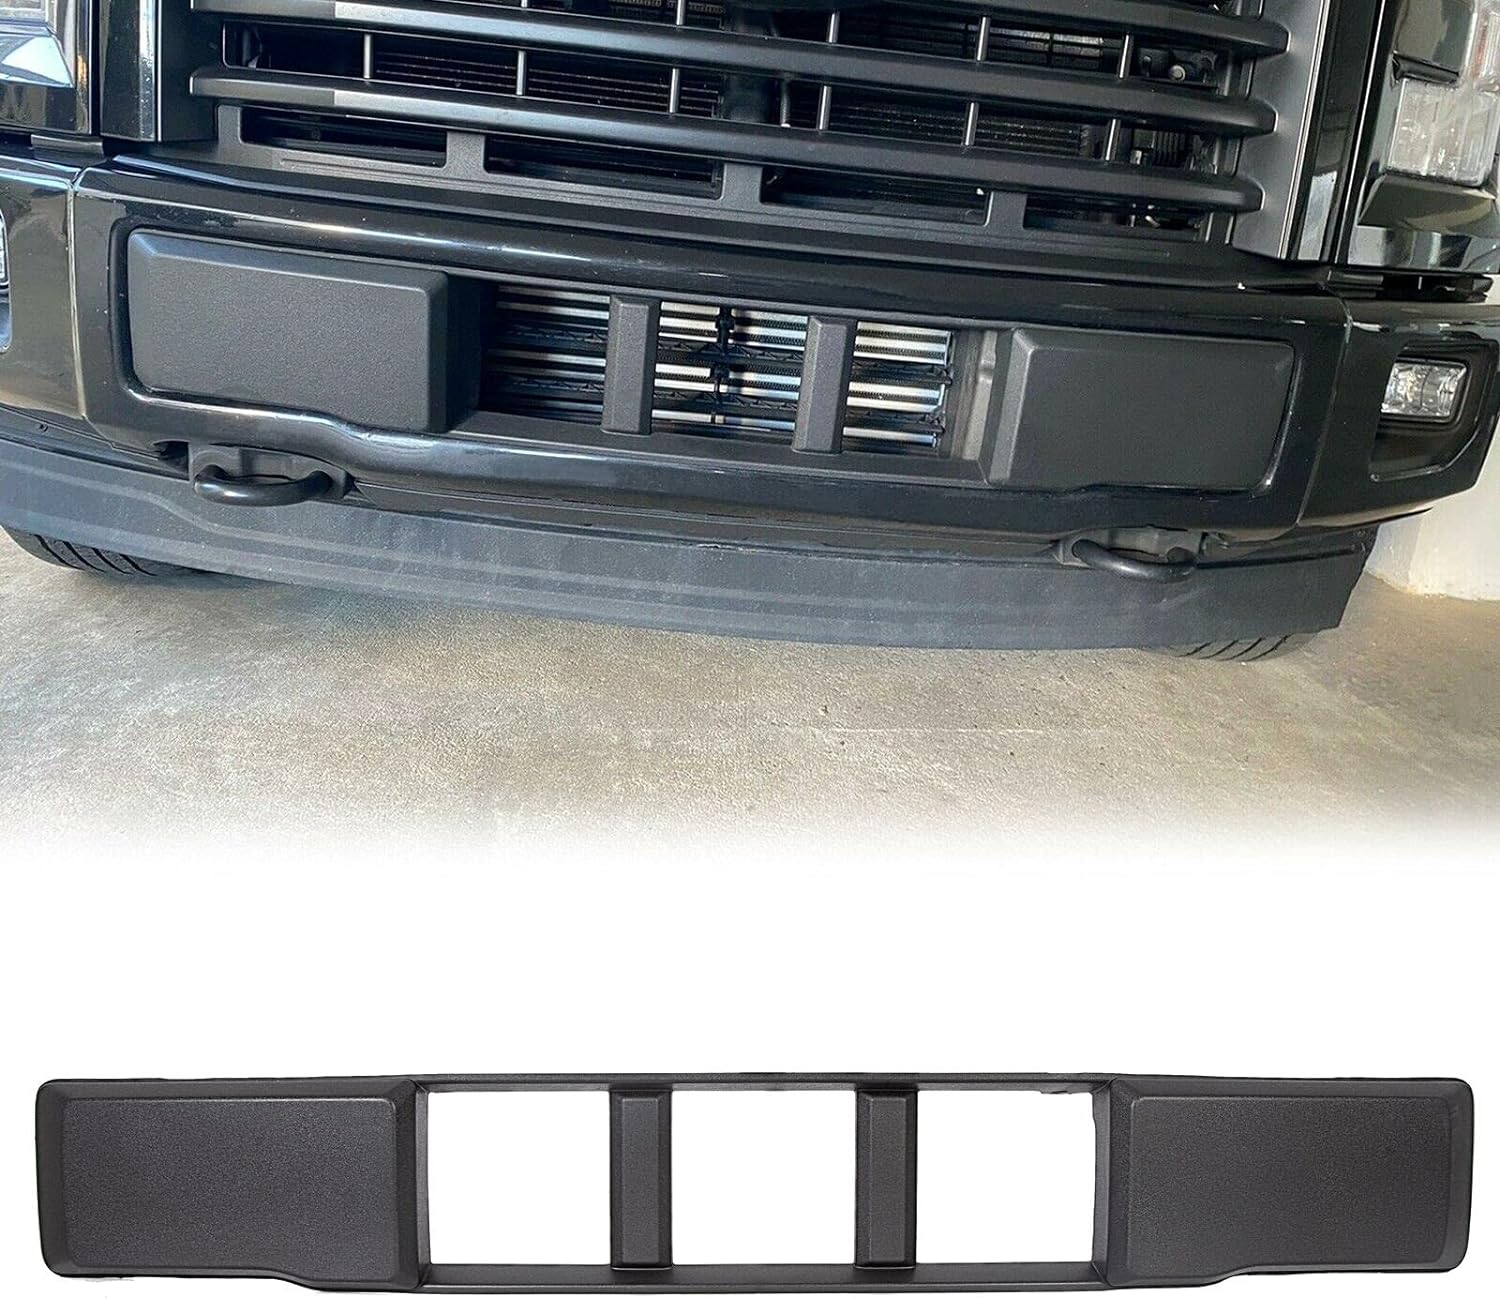 HSCHER Black Plastic Front Bumper Cover Lower Grille Trim Panel Replacement For:2015-2017 F150